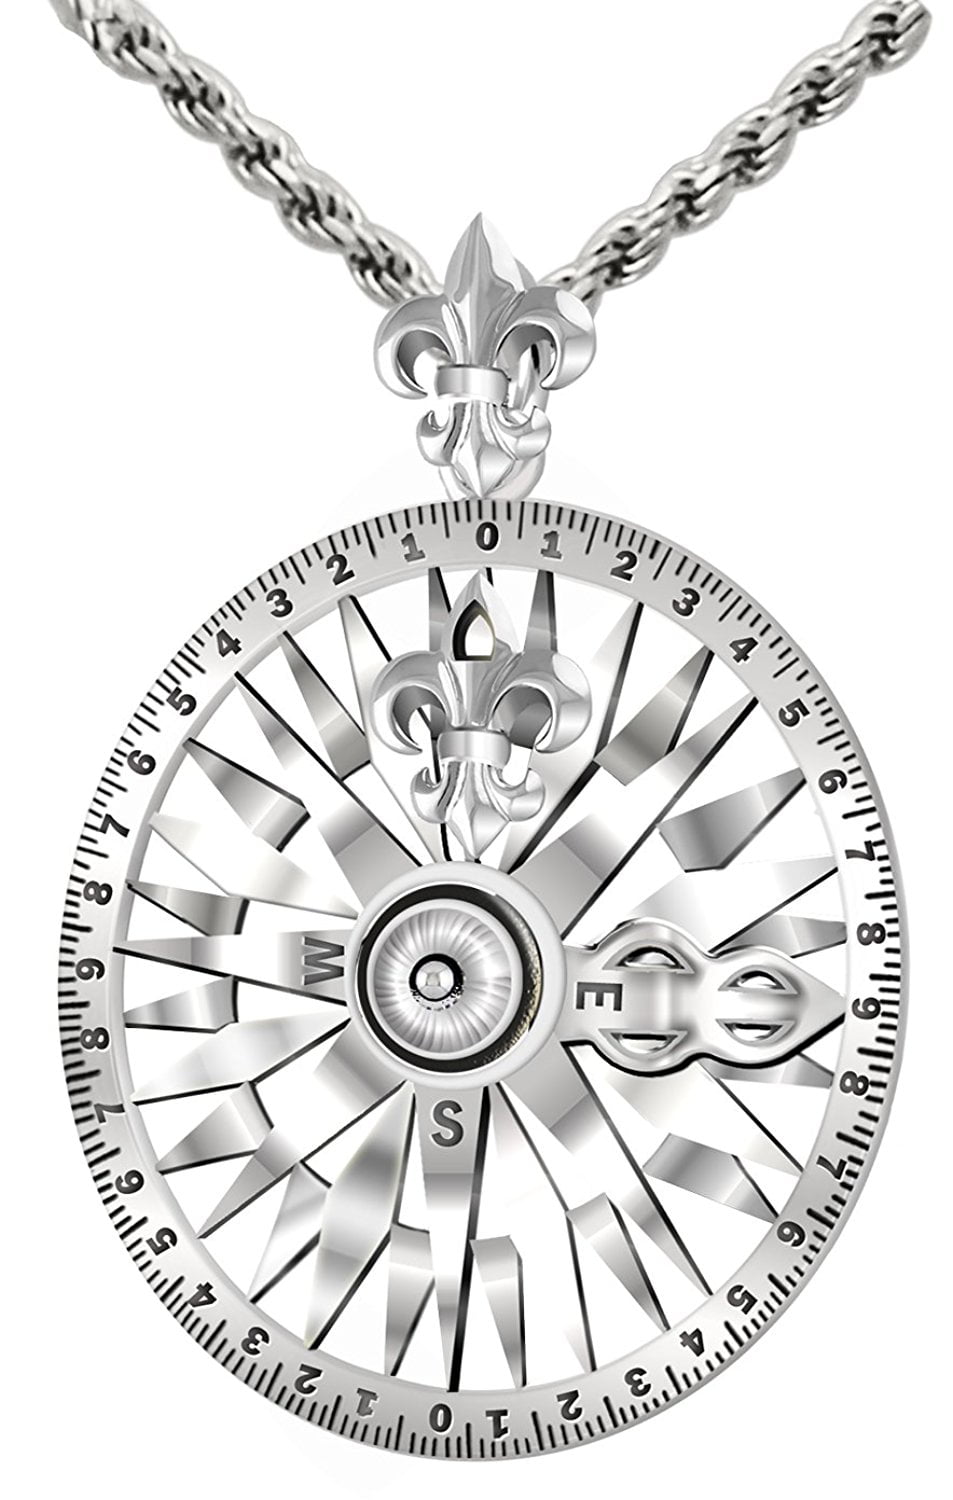 New Antique 0.925 Sterling Silver Compass Rose Nautical Navigation Pendant  Necklace